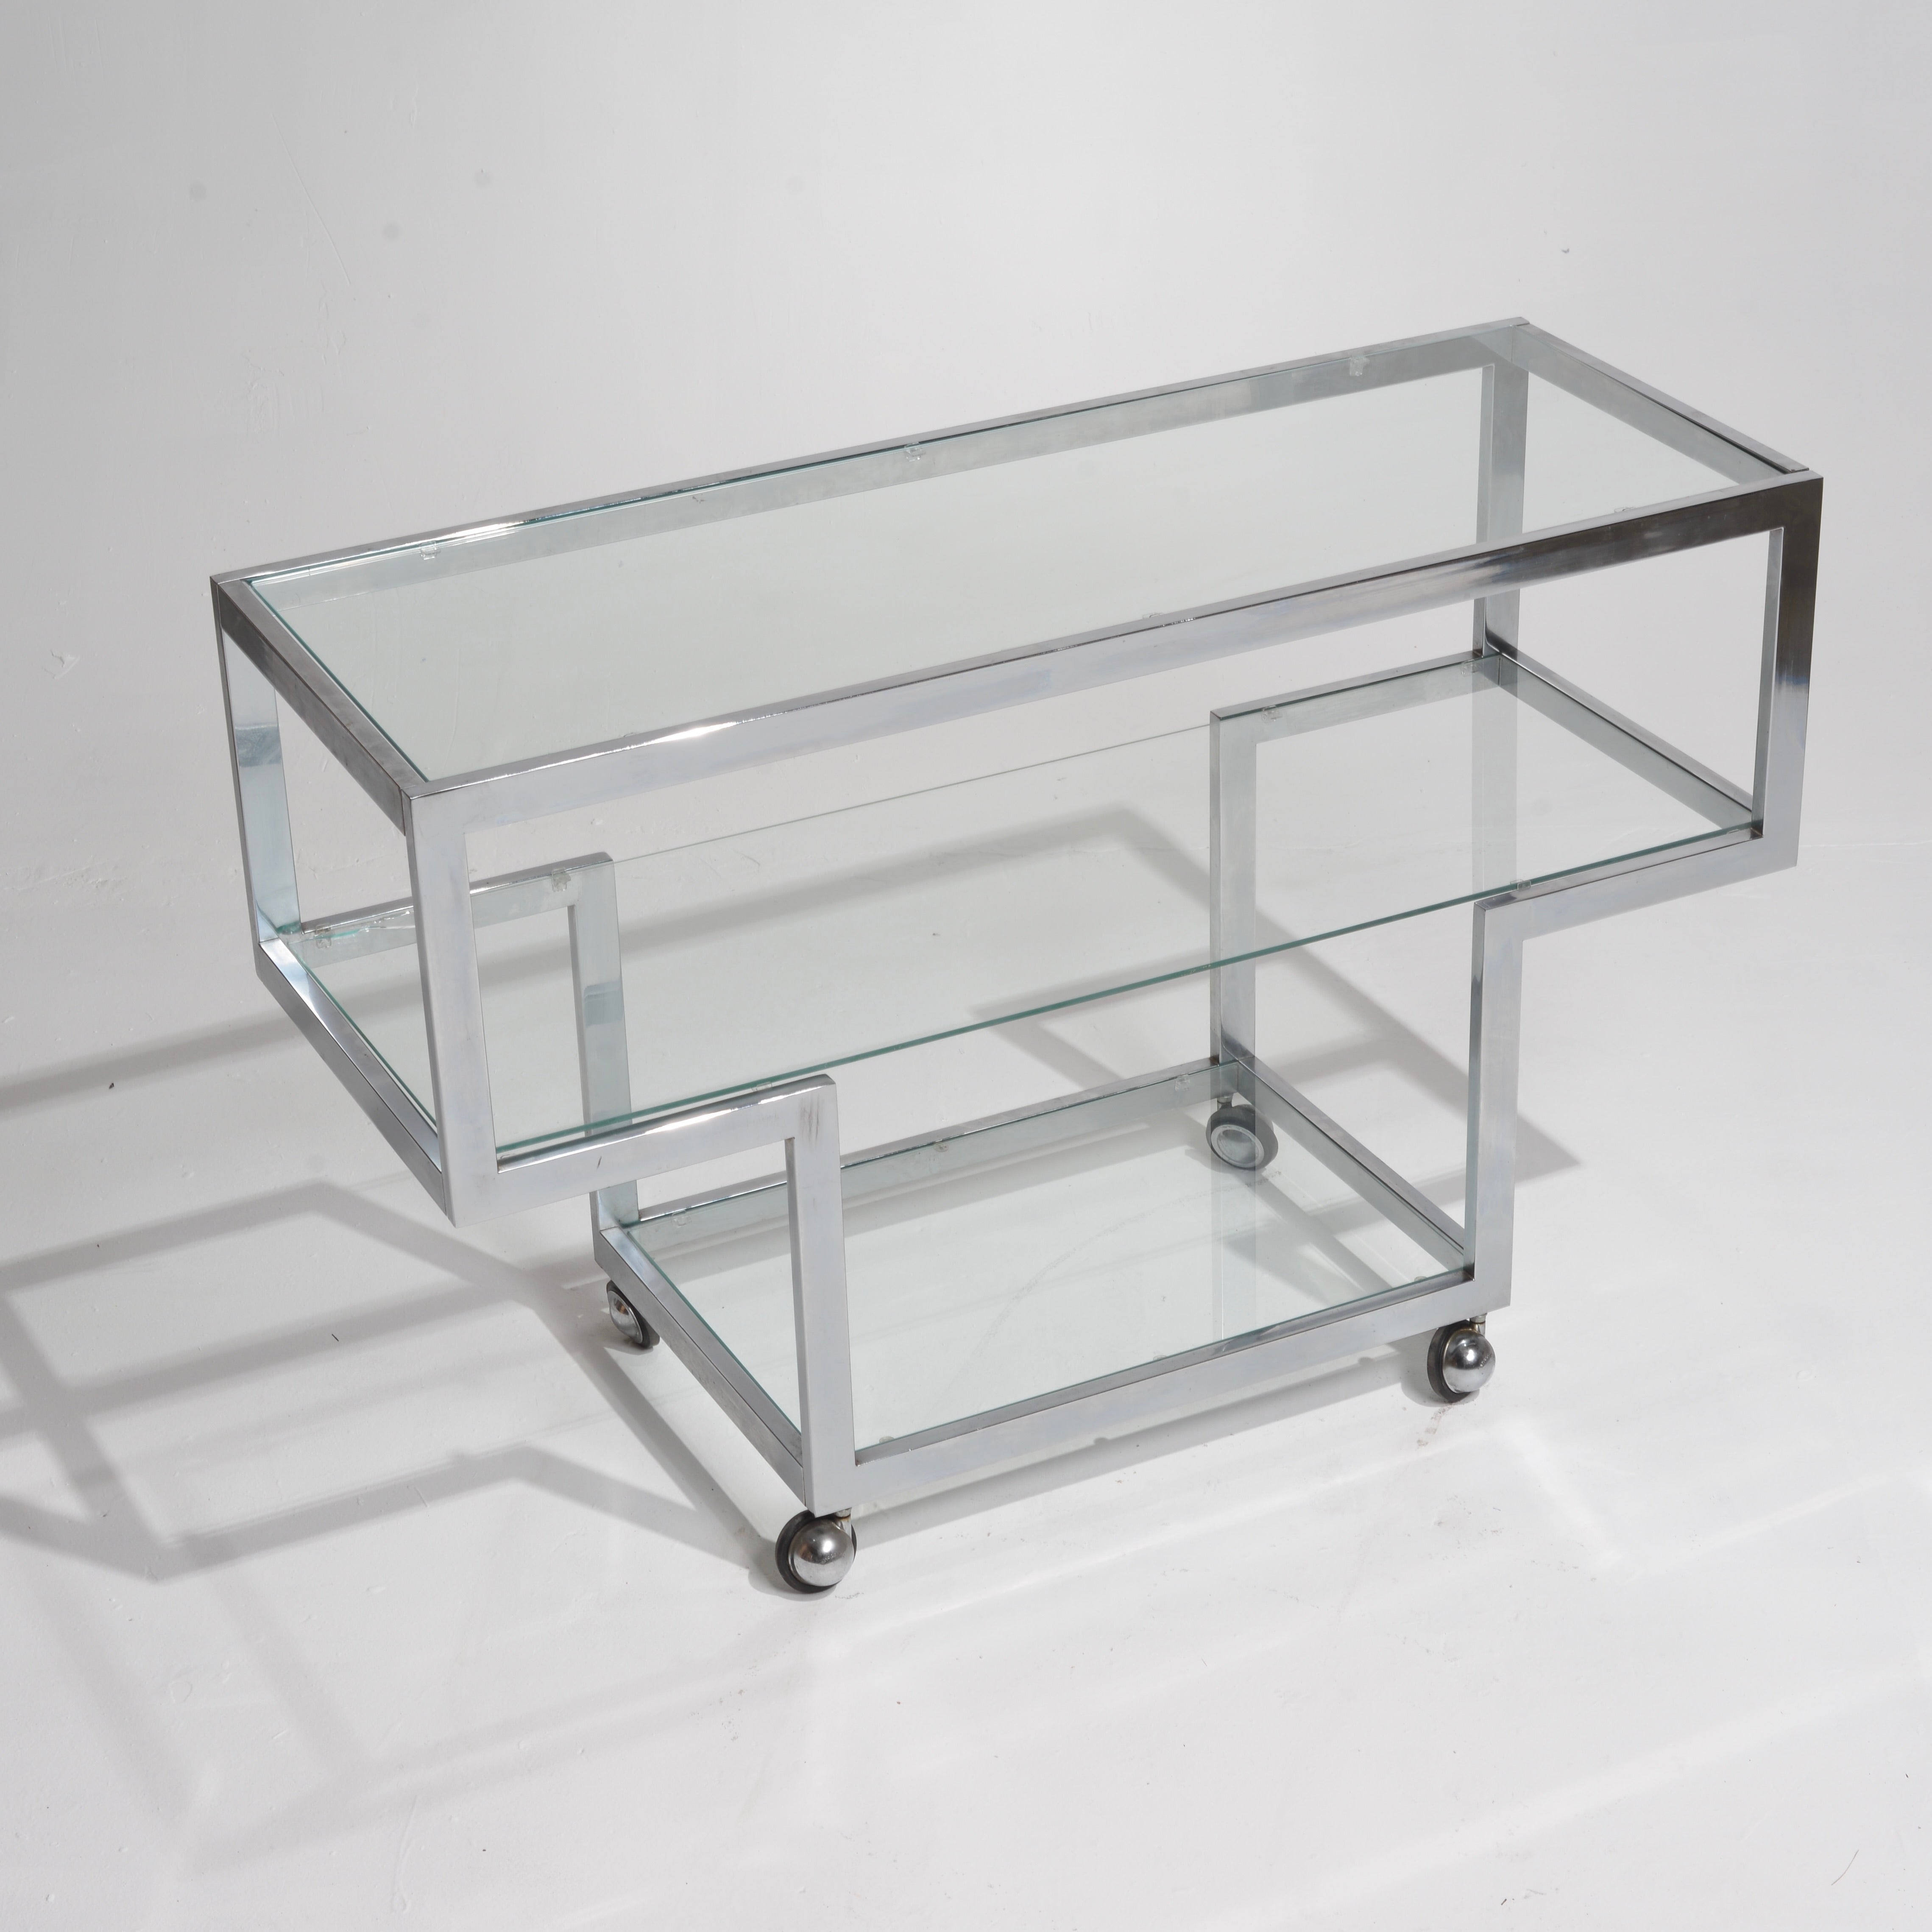 This is an amazing post-modern chrome and glass rolling bar cart or console.  